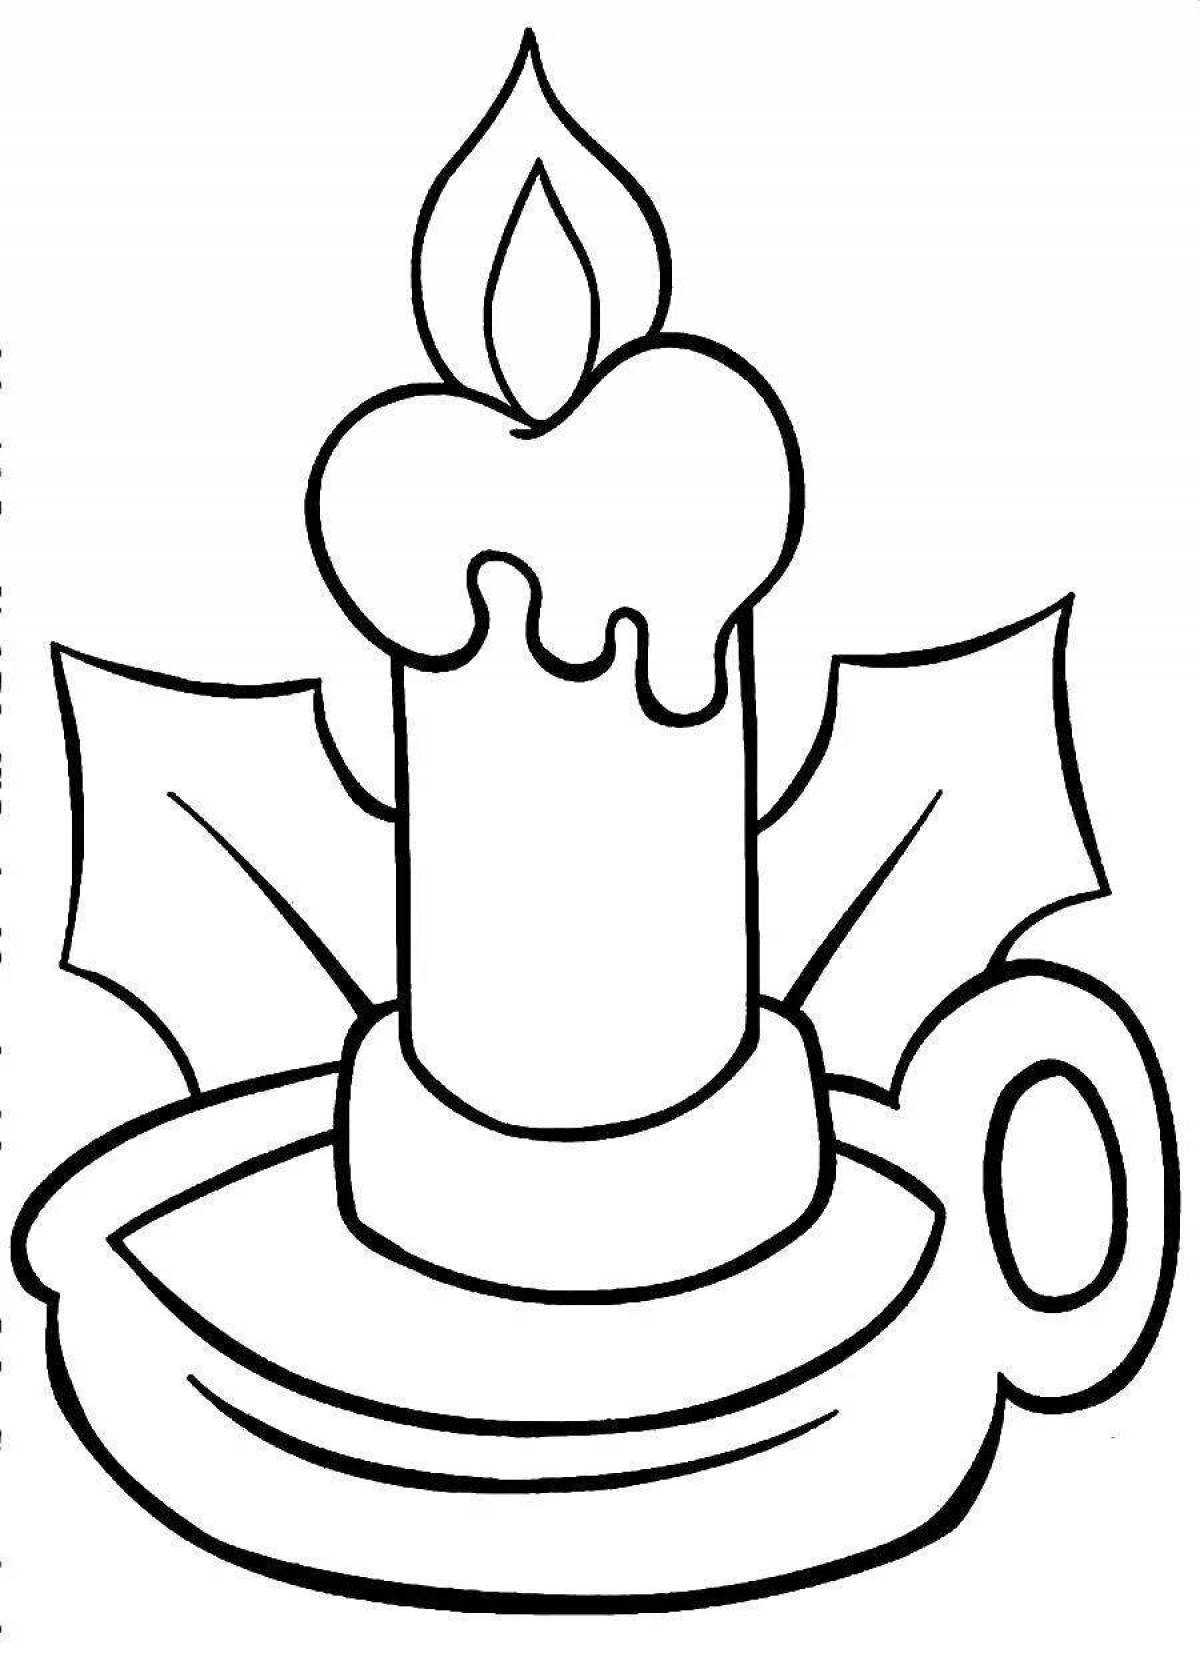 Cute Christmas candle coloring book for kids